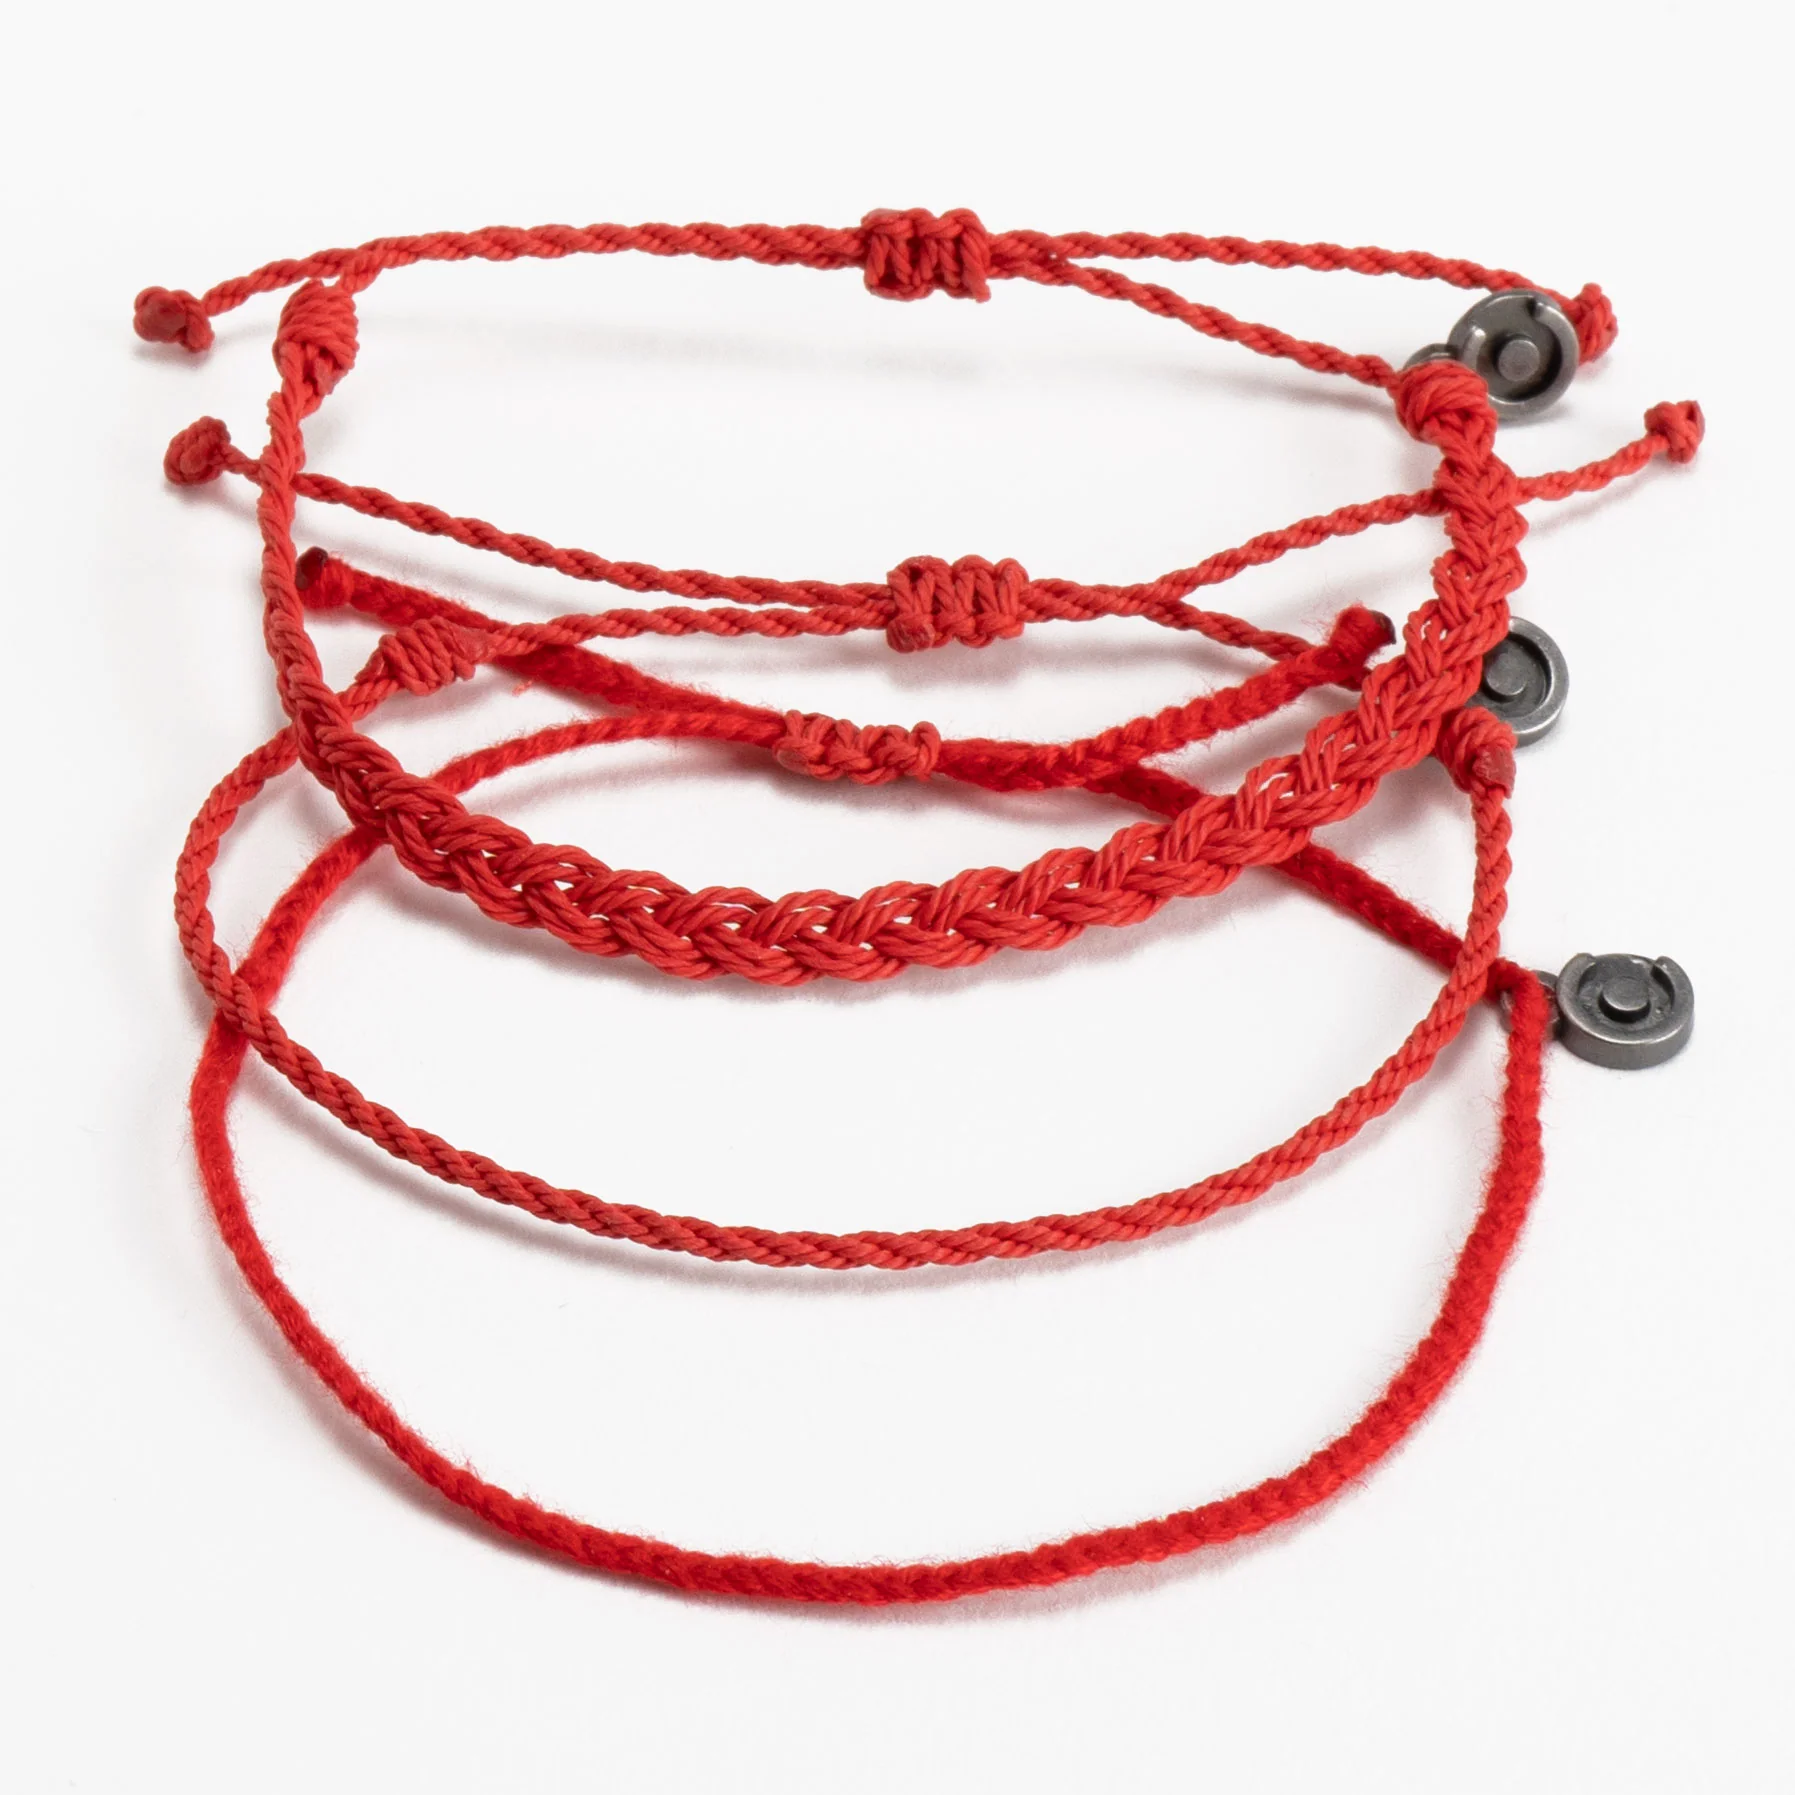 Red Bracelets for Love and Passion: Romantic Jewelry Options插图